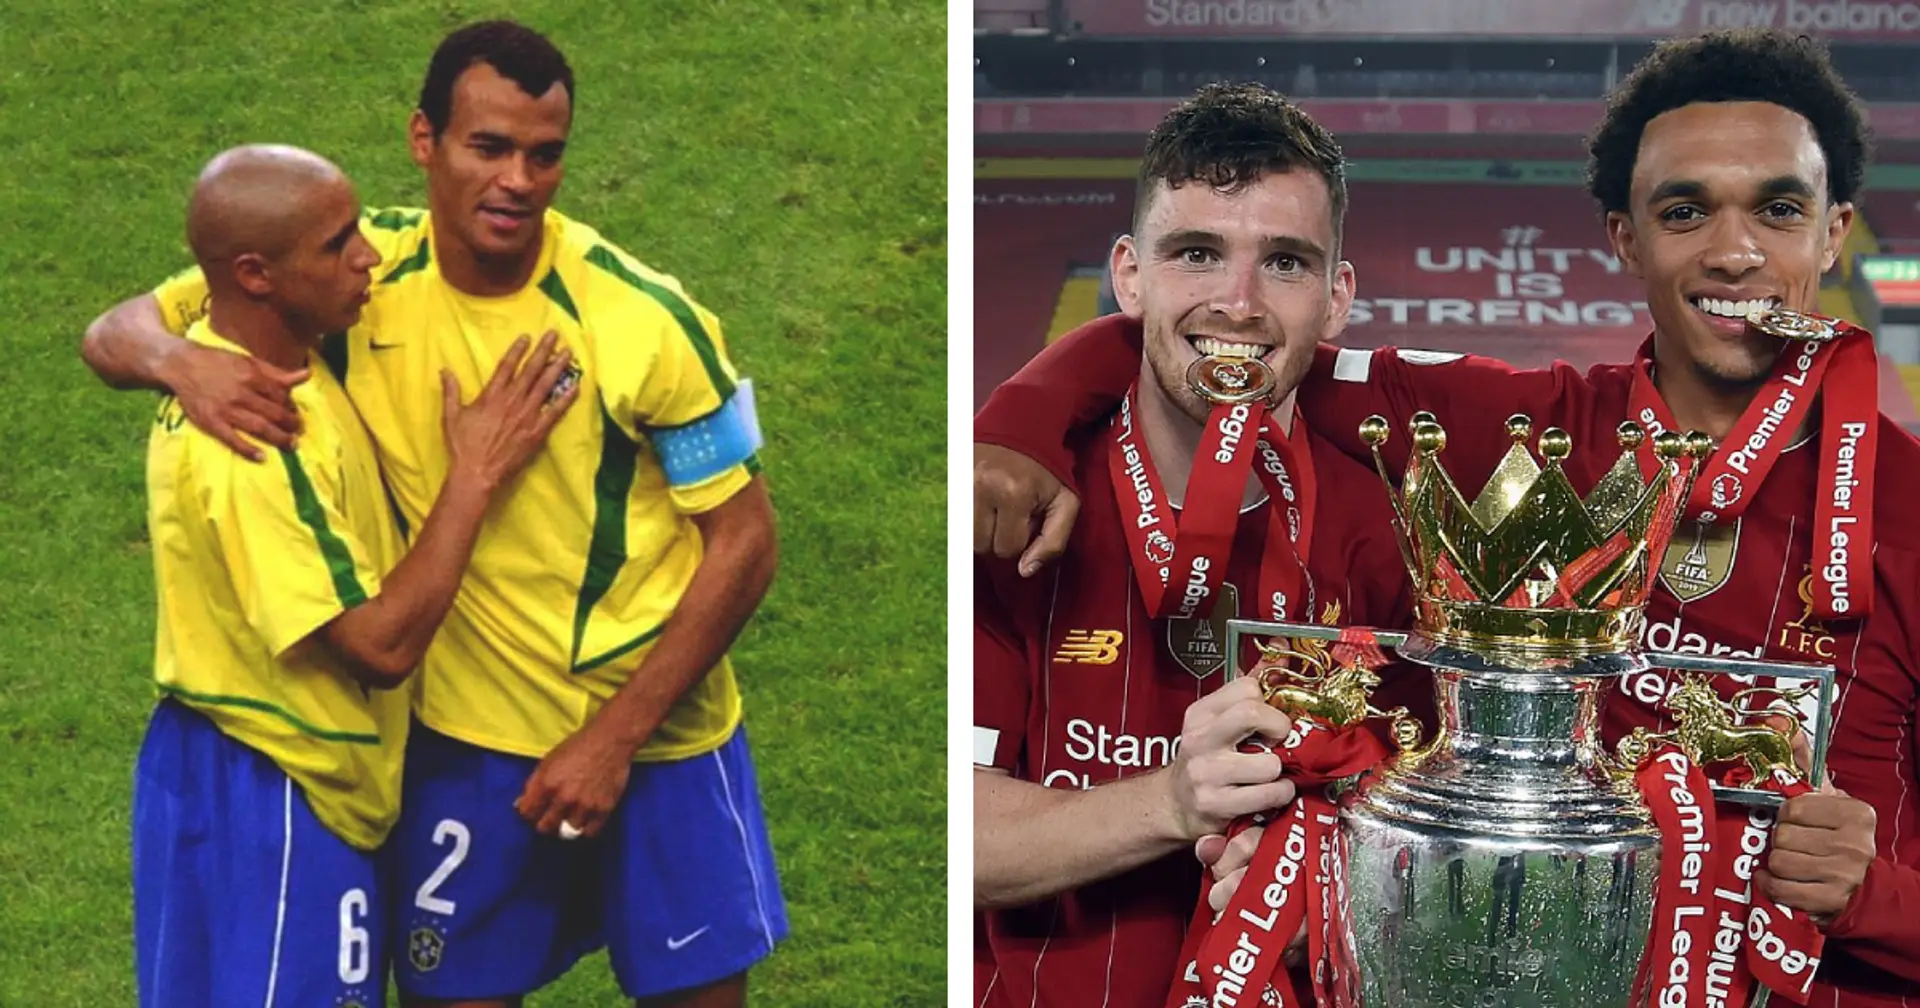 'You're mentioning them in the same breath': Liverpool duo compared to Brazil legends Roberto Carlos and Cafu